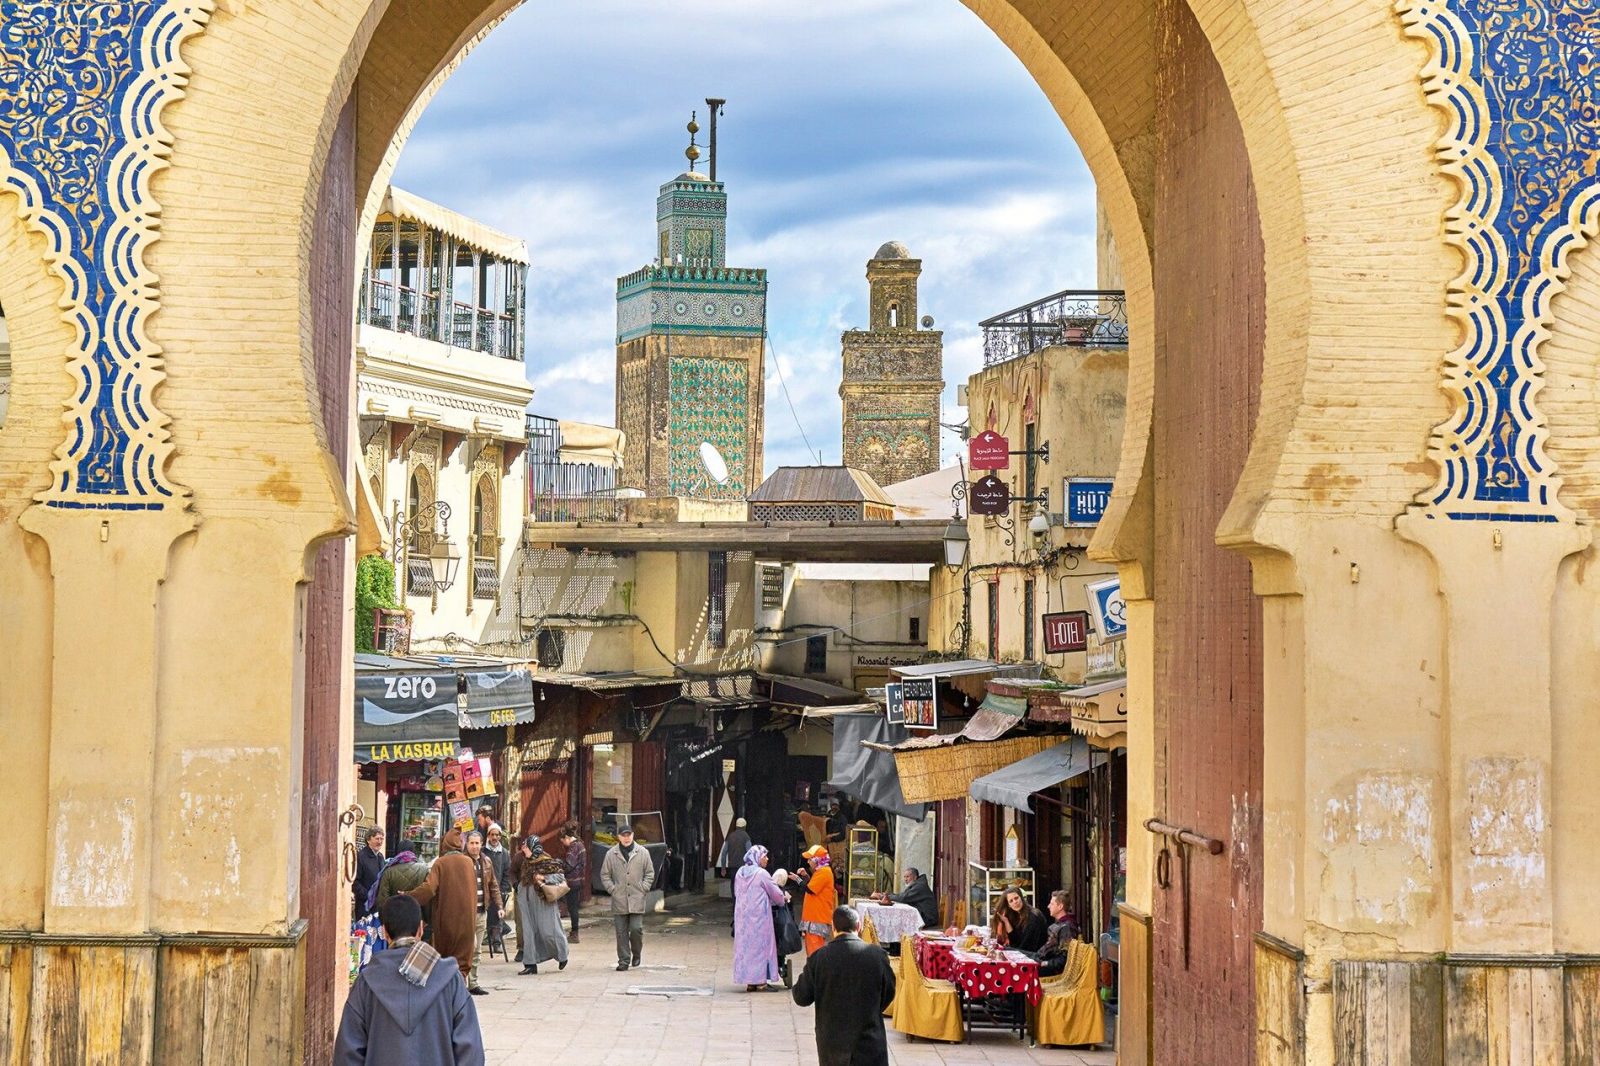 F In Geography Quiz Fez or Fes, Morocco